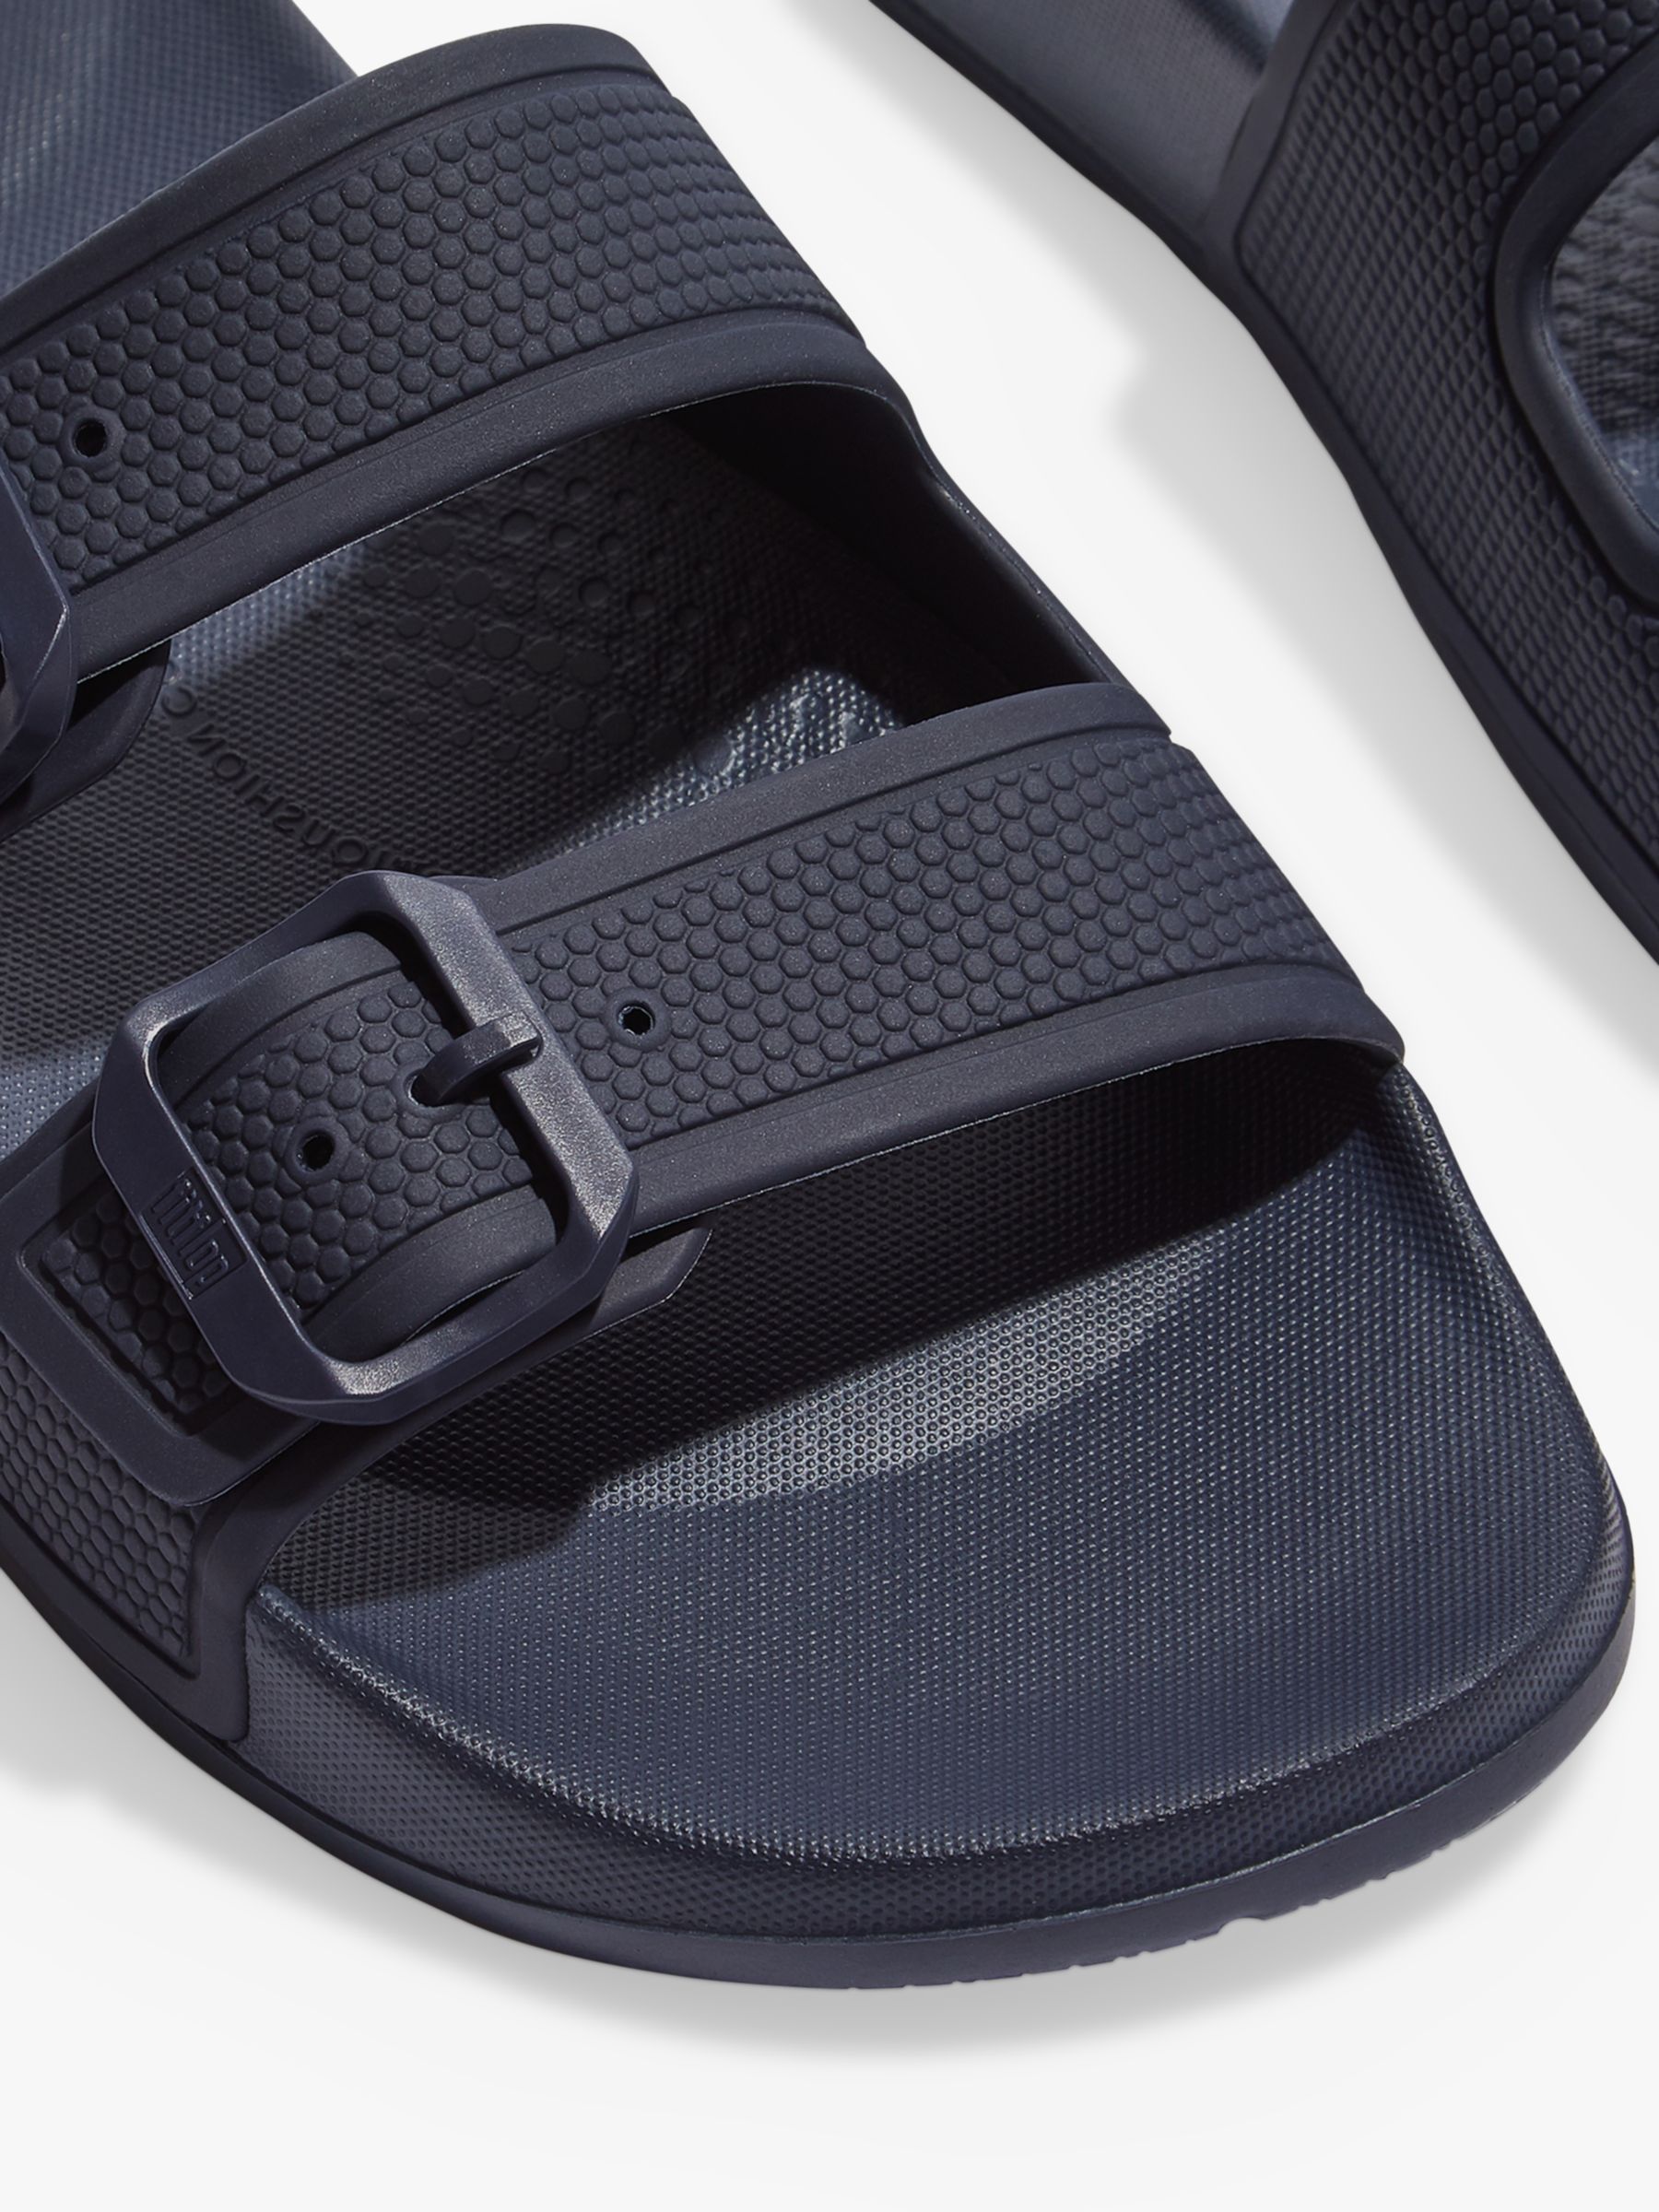 FitFlop IQushion Slider Sandals, Midnight Navy at John Lewis & Partners